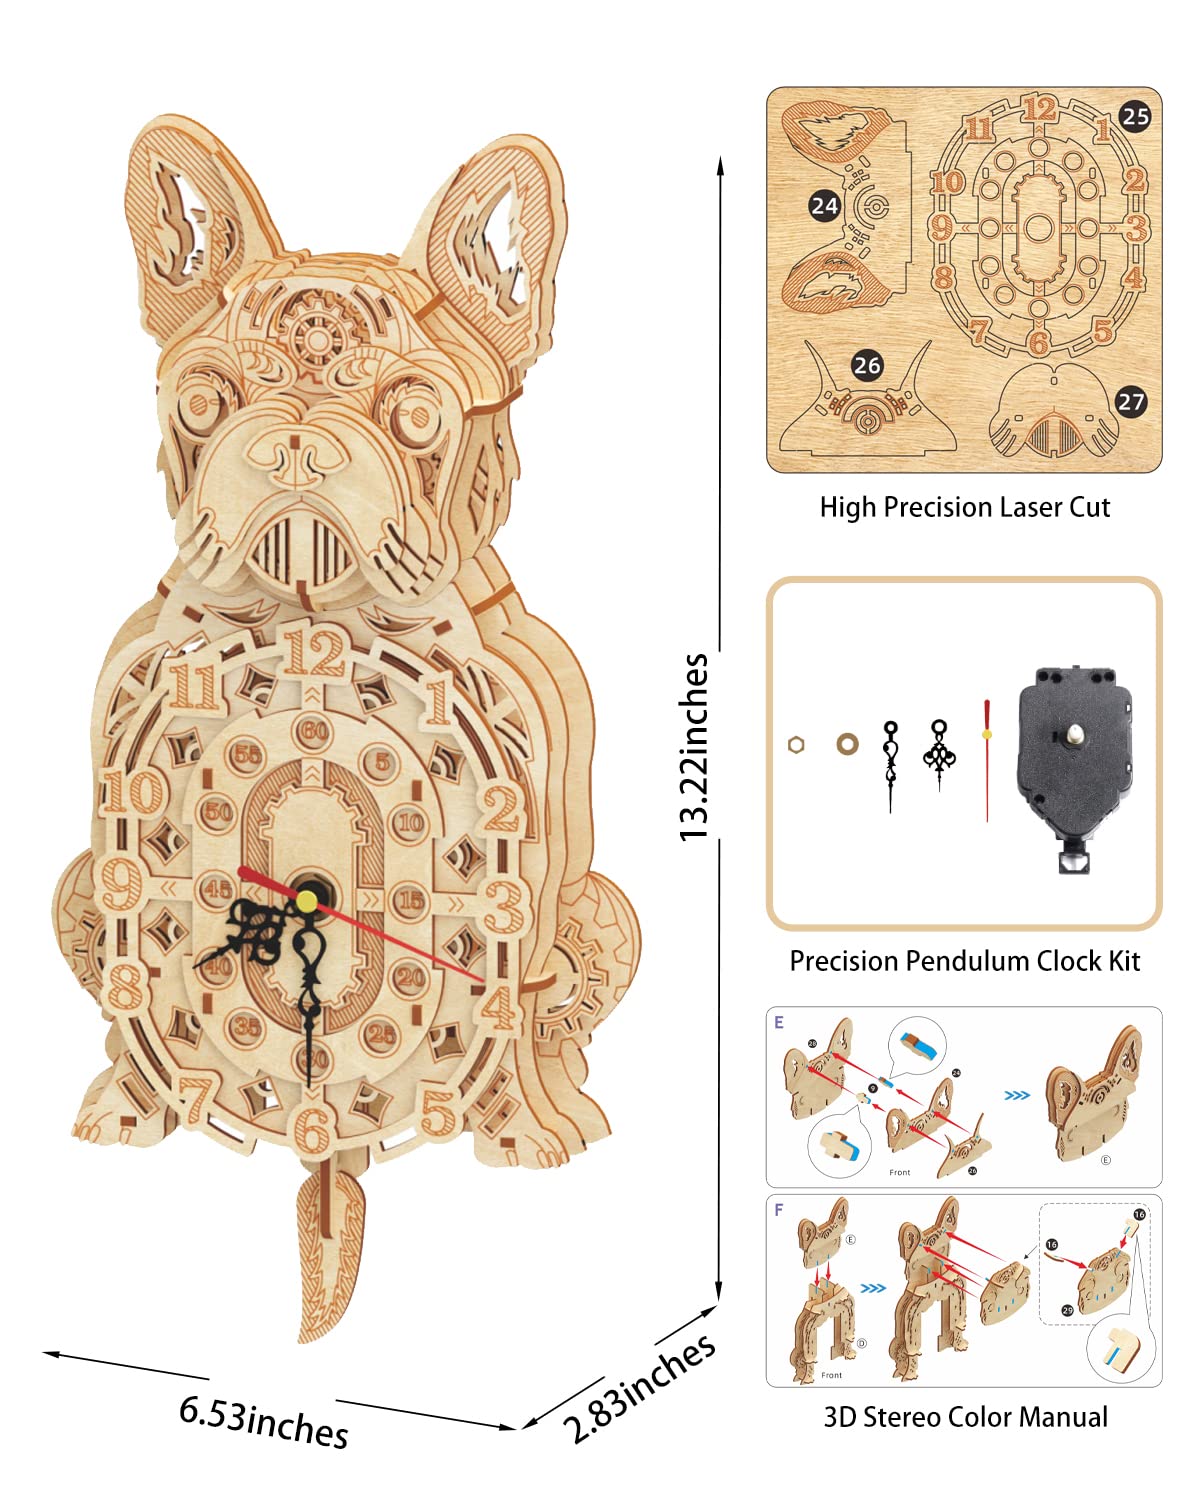 Wooden 3D Puzzles for Adults: Mechanical Bulldog Clock Model - Christmas-Themed Wooden Clock Kits to Build with Wall Clock Pendulum